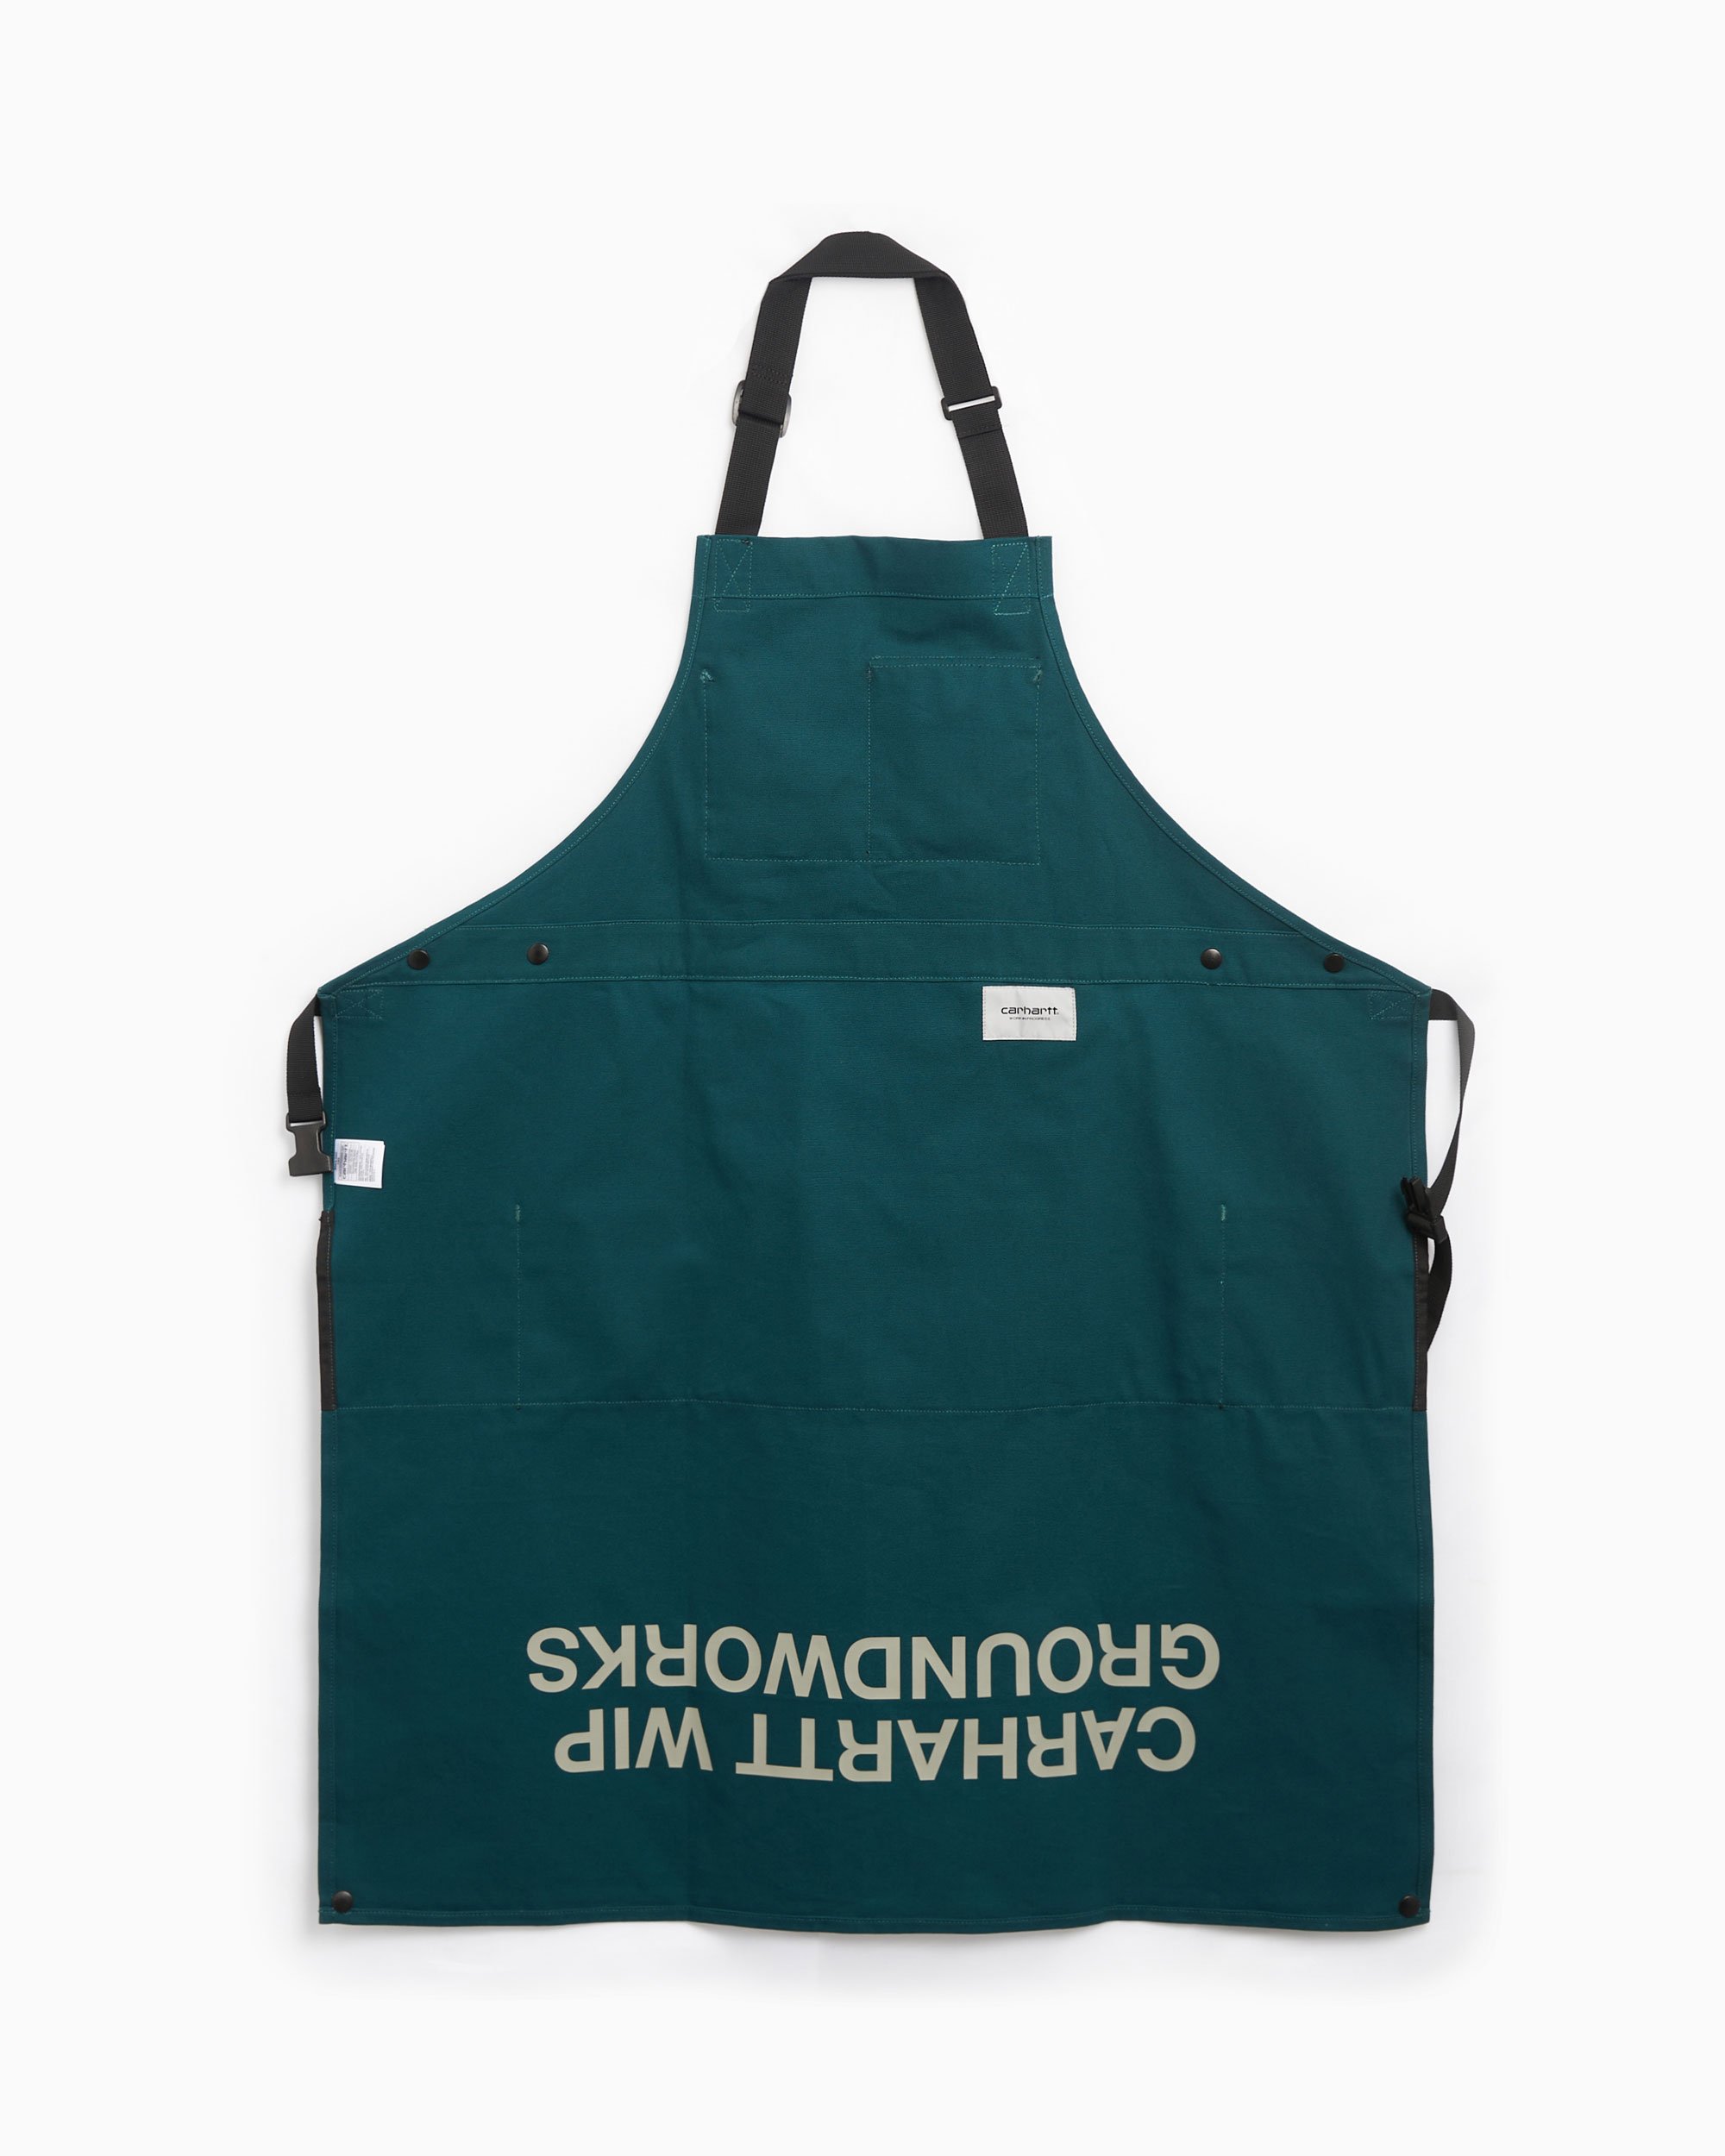 Carhartt WIP Groundworks Apron Dungarees Black, Green I033281 